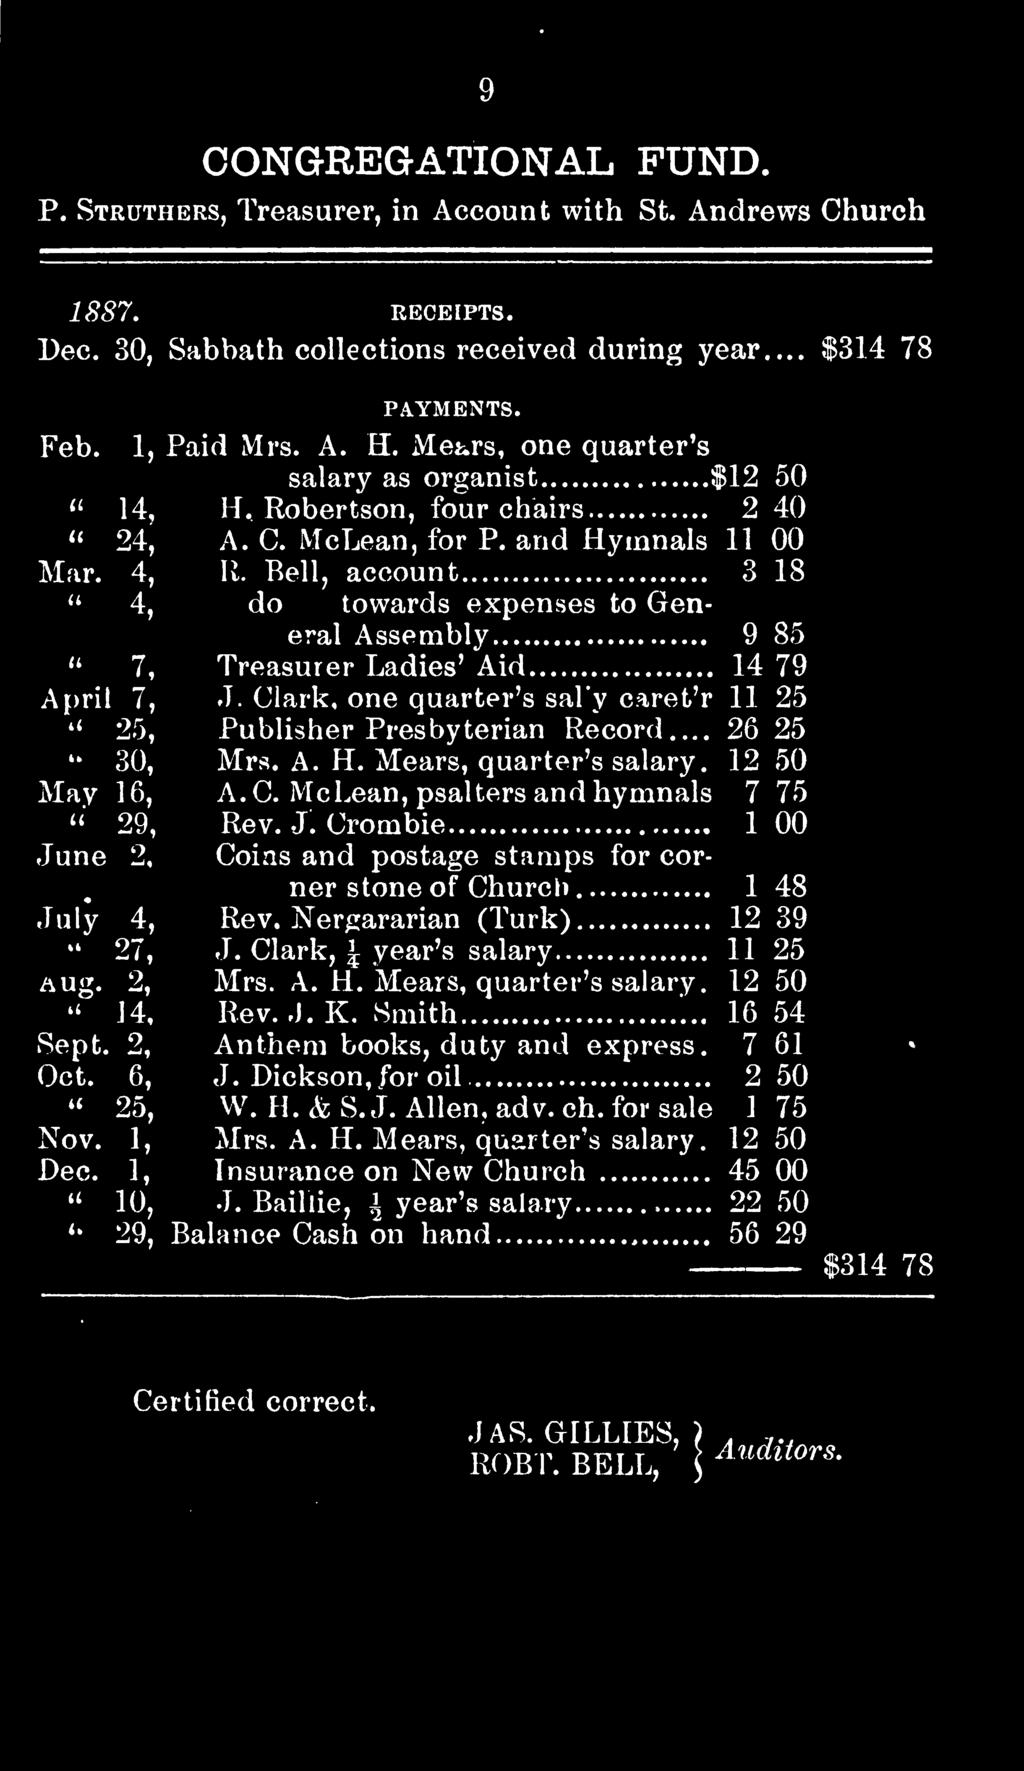 Bell, account 3 18 " 4, do towards expenses to General Assembly 9 85 " 7, Treasurer Ladies' Aid 14 79 April 7, J. Clark, one quarter's saly caret'r 11 25 " 25, Publisher Presbyterian Record.